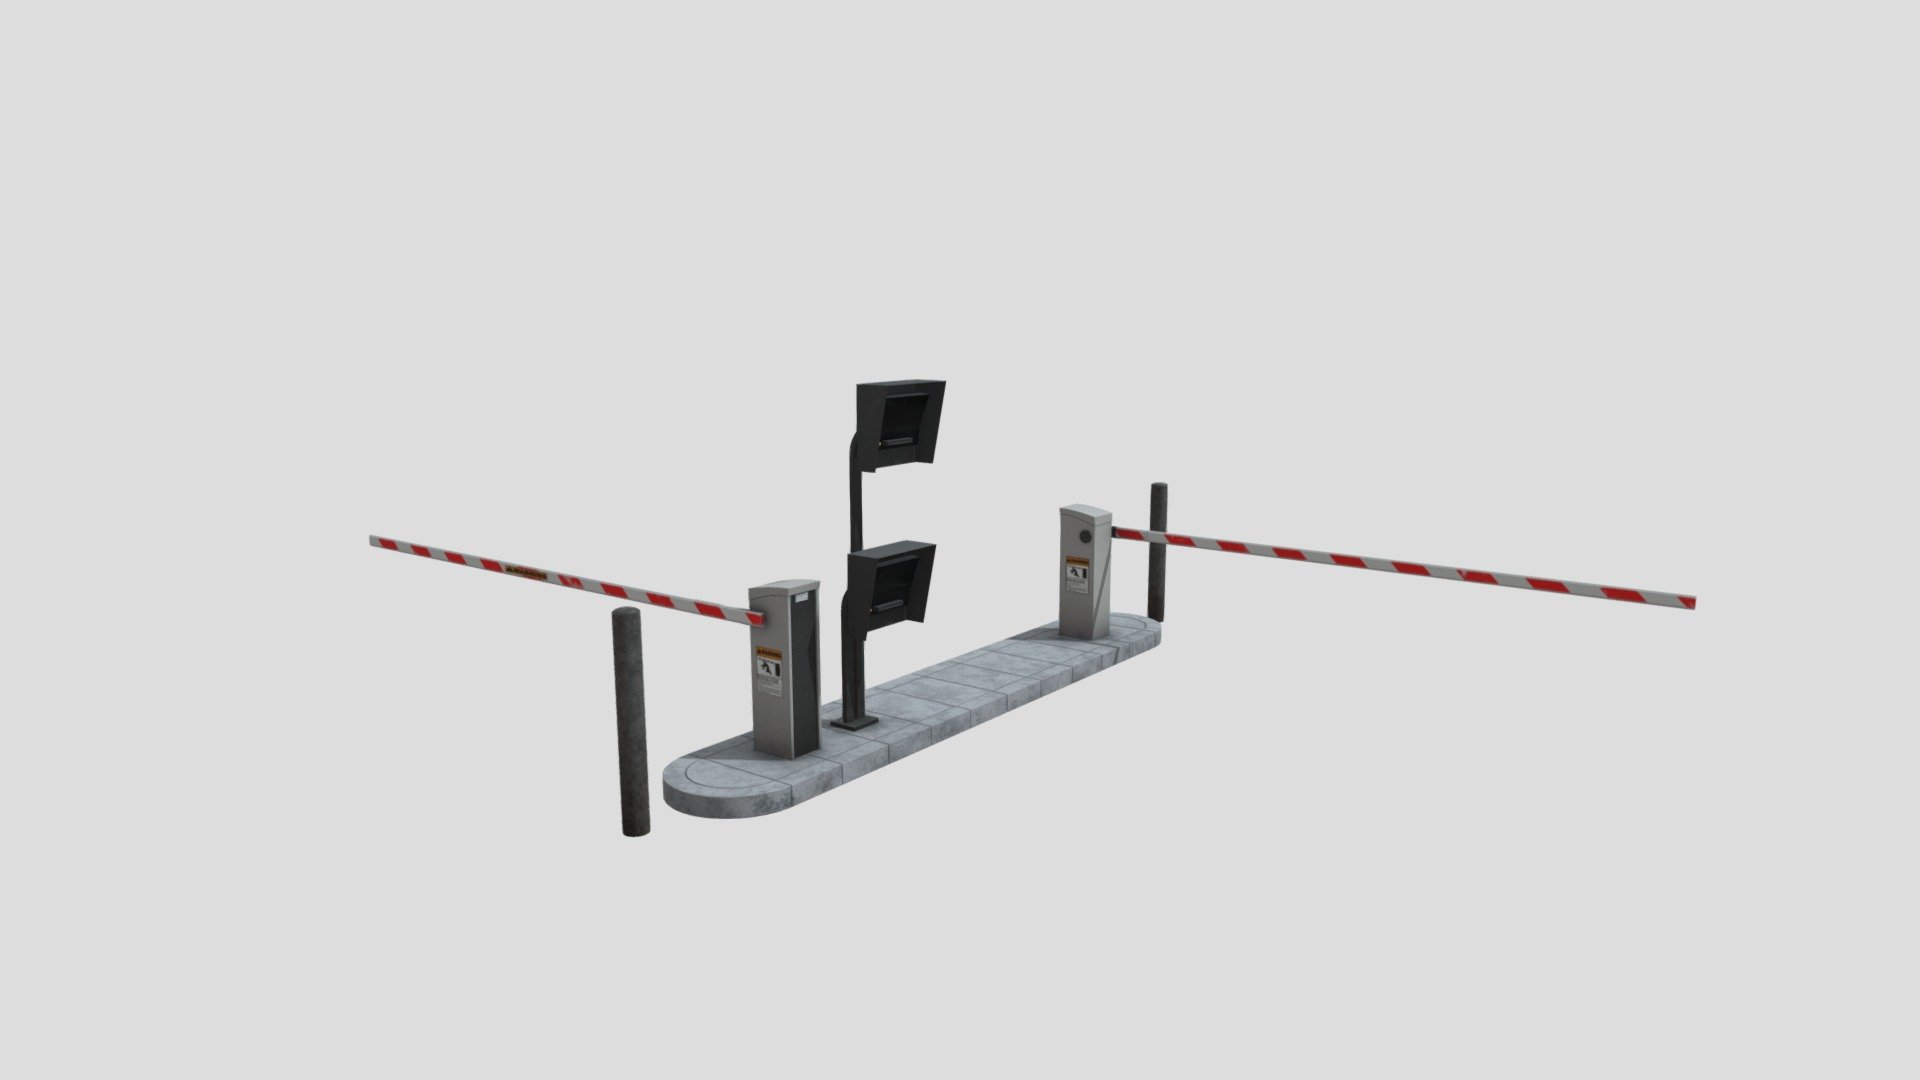 Highly detailed 3d model of&nbsp;railway barrier with all textures, shaders and materials. This 3d model is ready to use, just put it into your scene 3d model